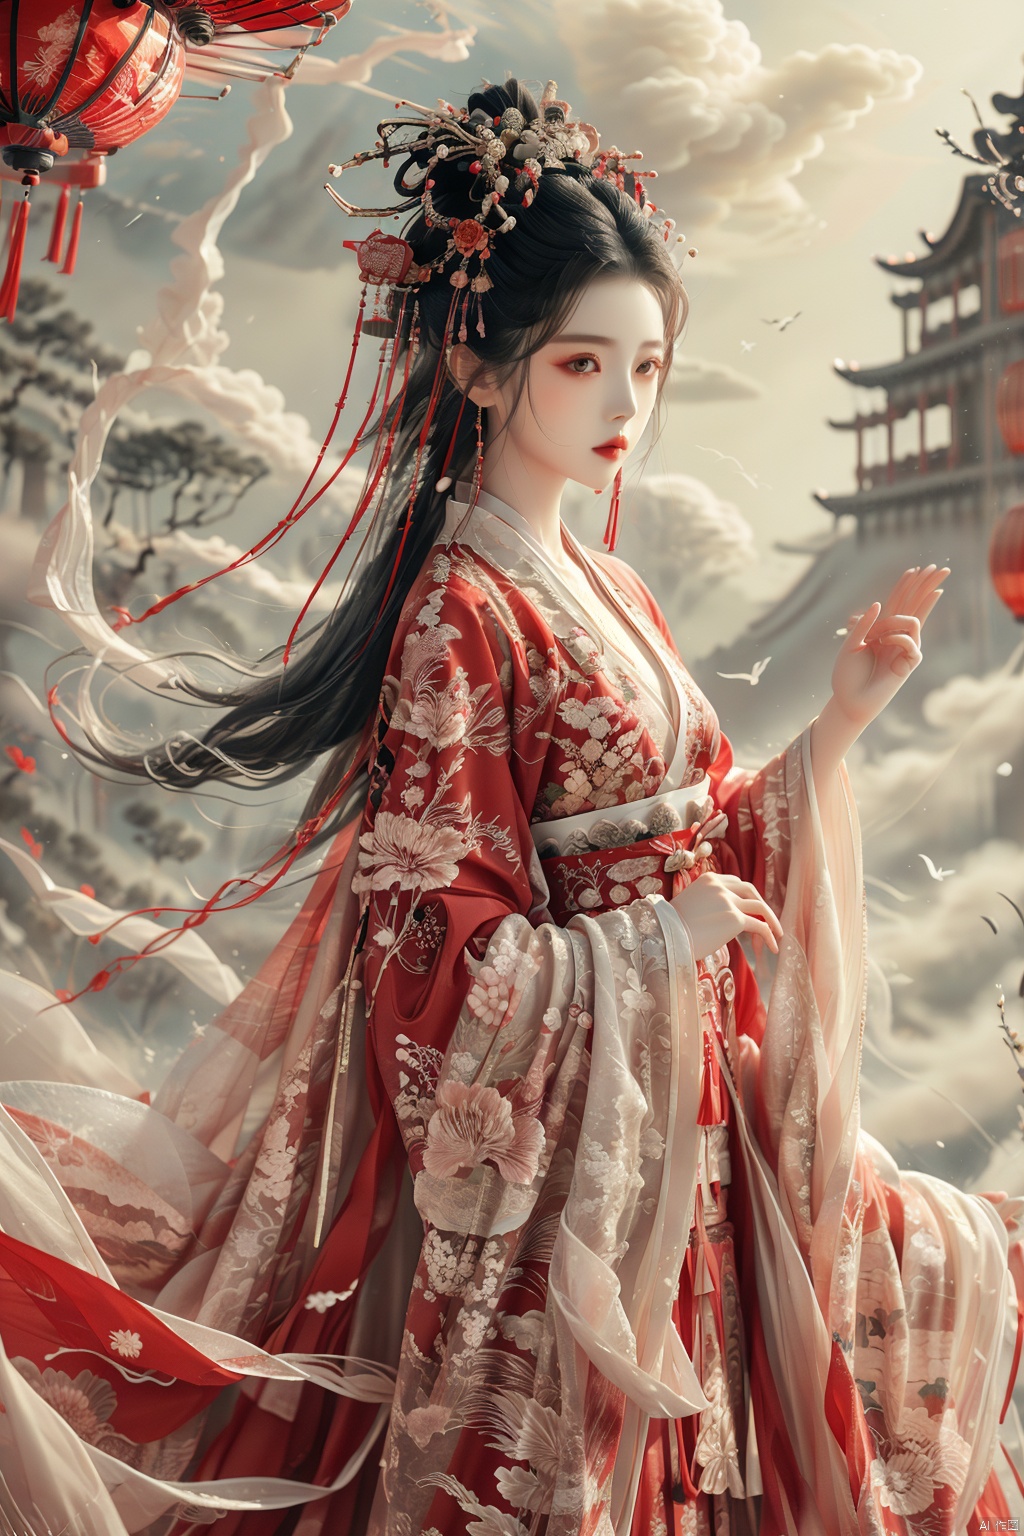  An ancient China girl, dressed in China ancient Hanfu, hung with red, China red and red lanterns, was photographed from the side, all over her body, her hair stuck and her hair flowered., xianjing crane hanfu cloud branch flower, linkedress_red dress